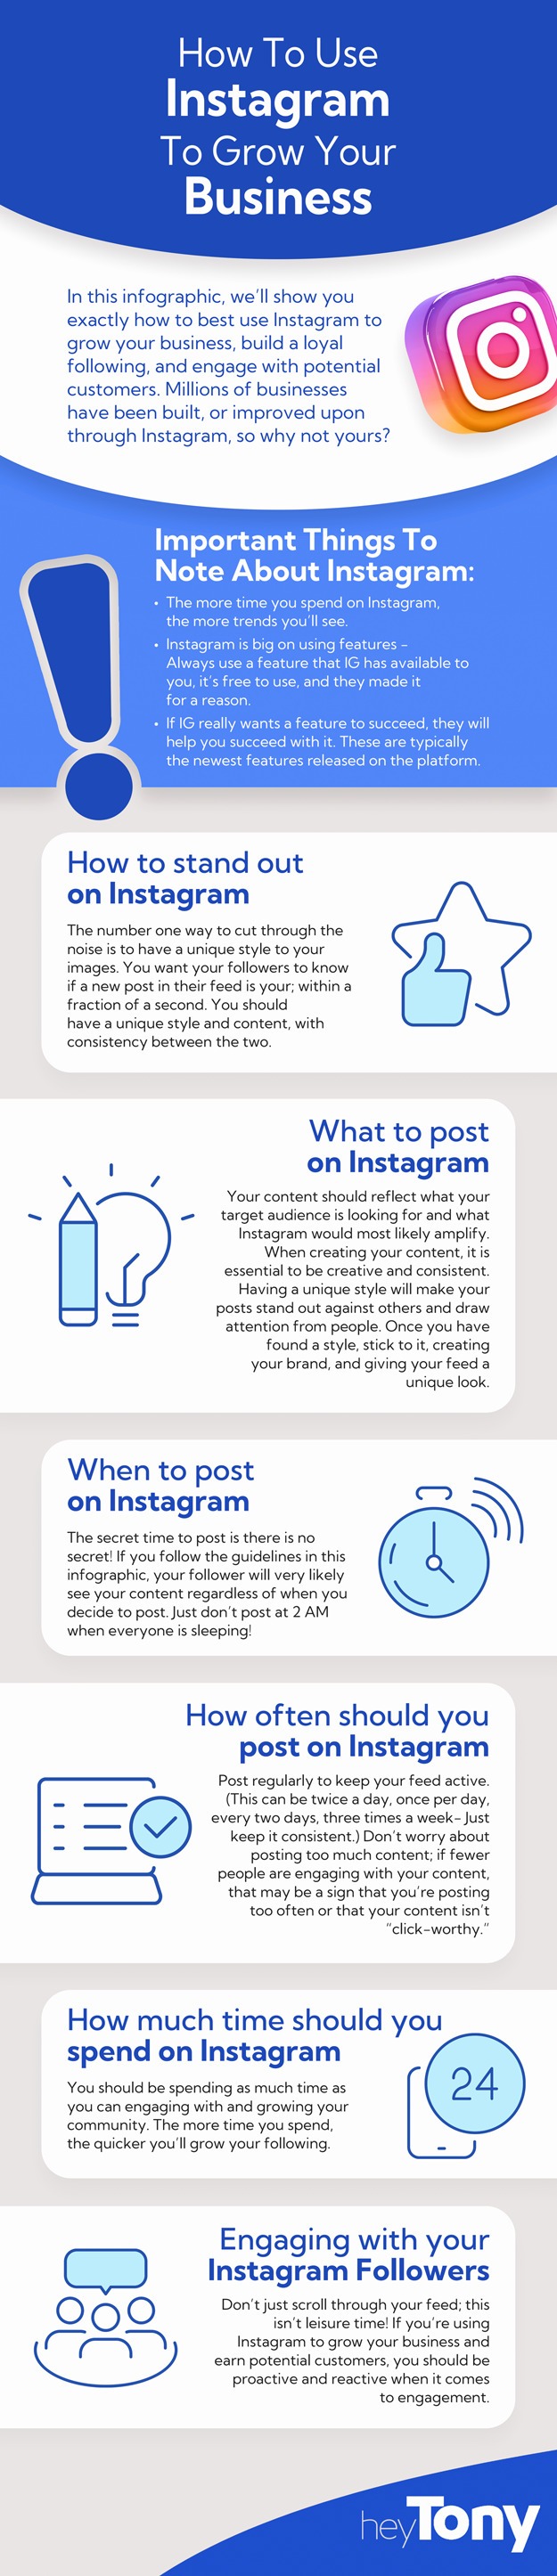 How to use Instagram to grow your business